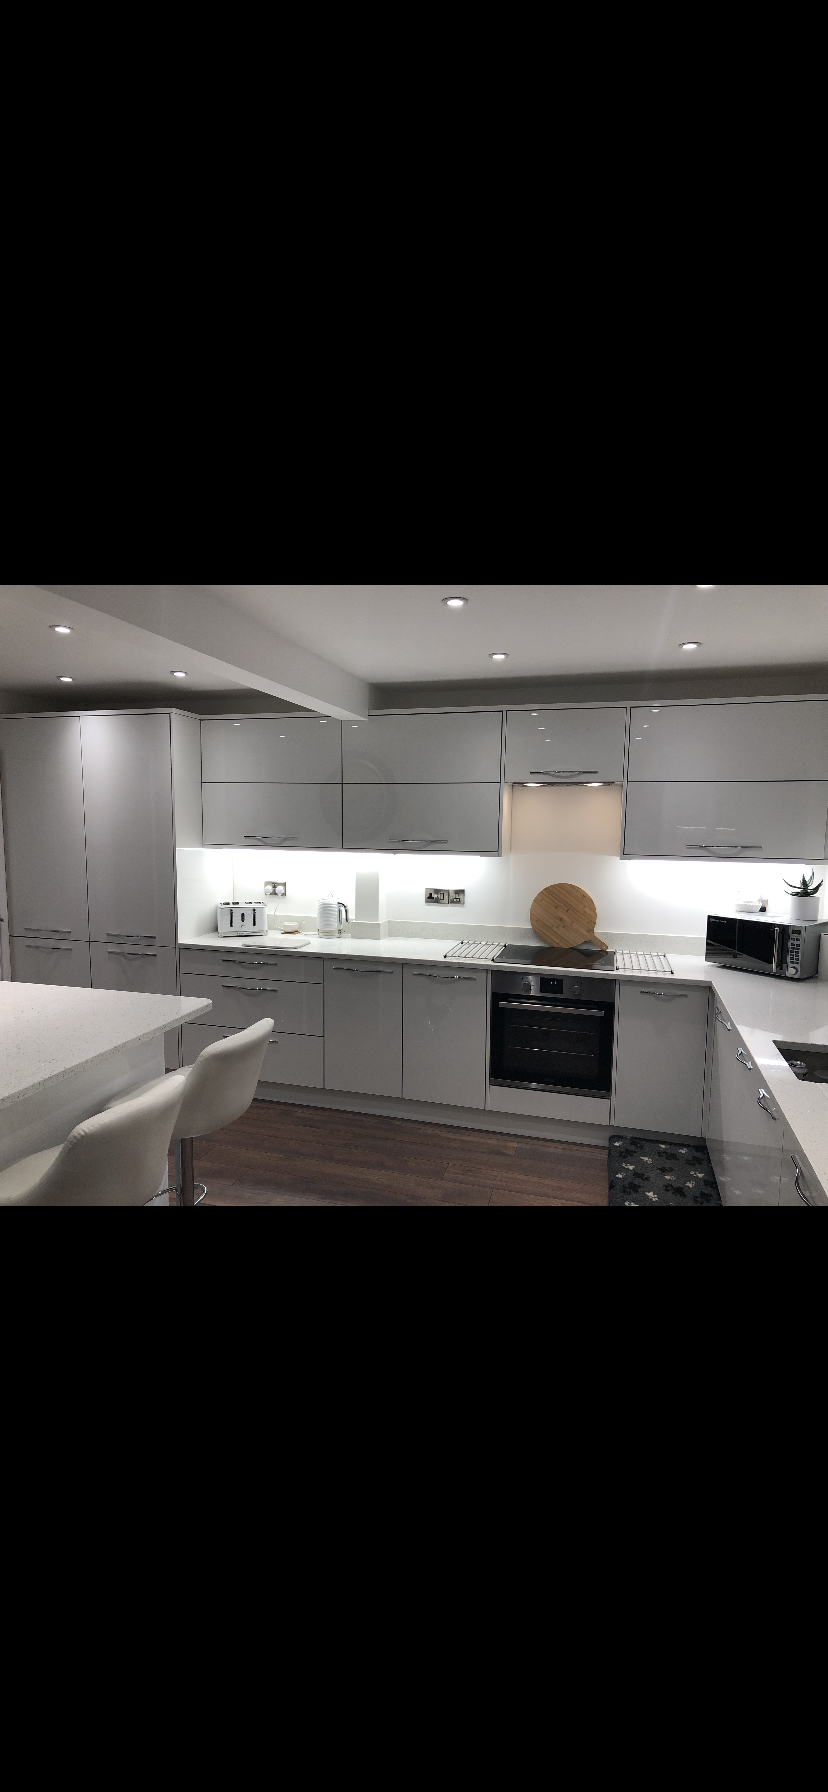 kitchen rewire in warrington  by Electrician4you in newton le willows